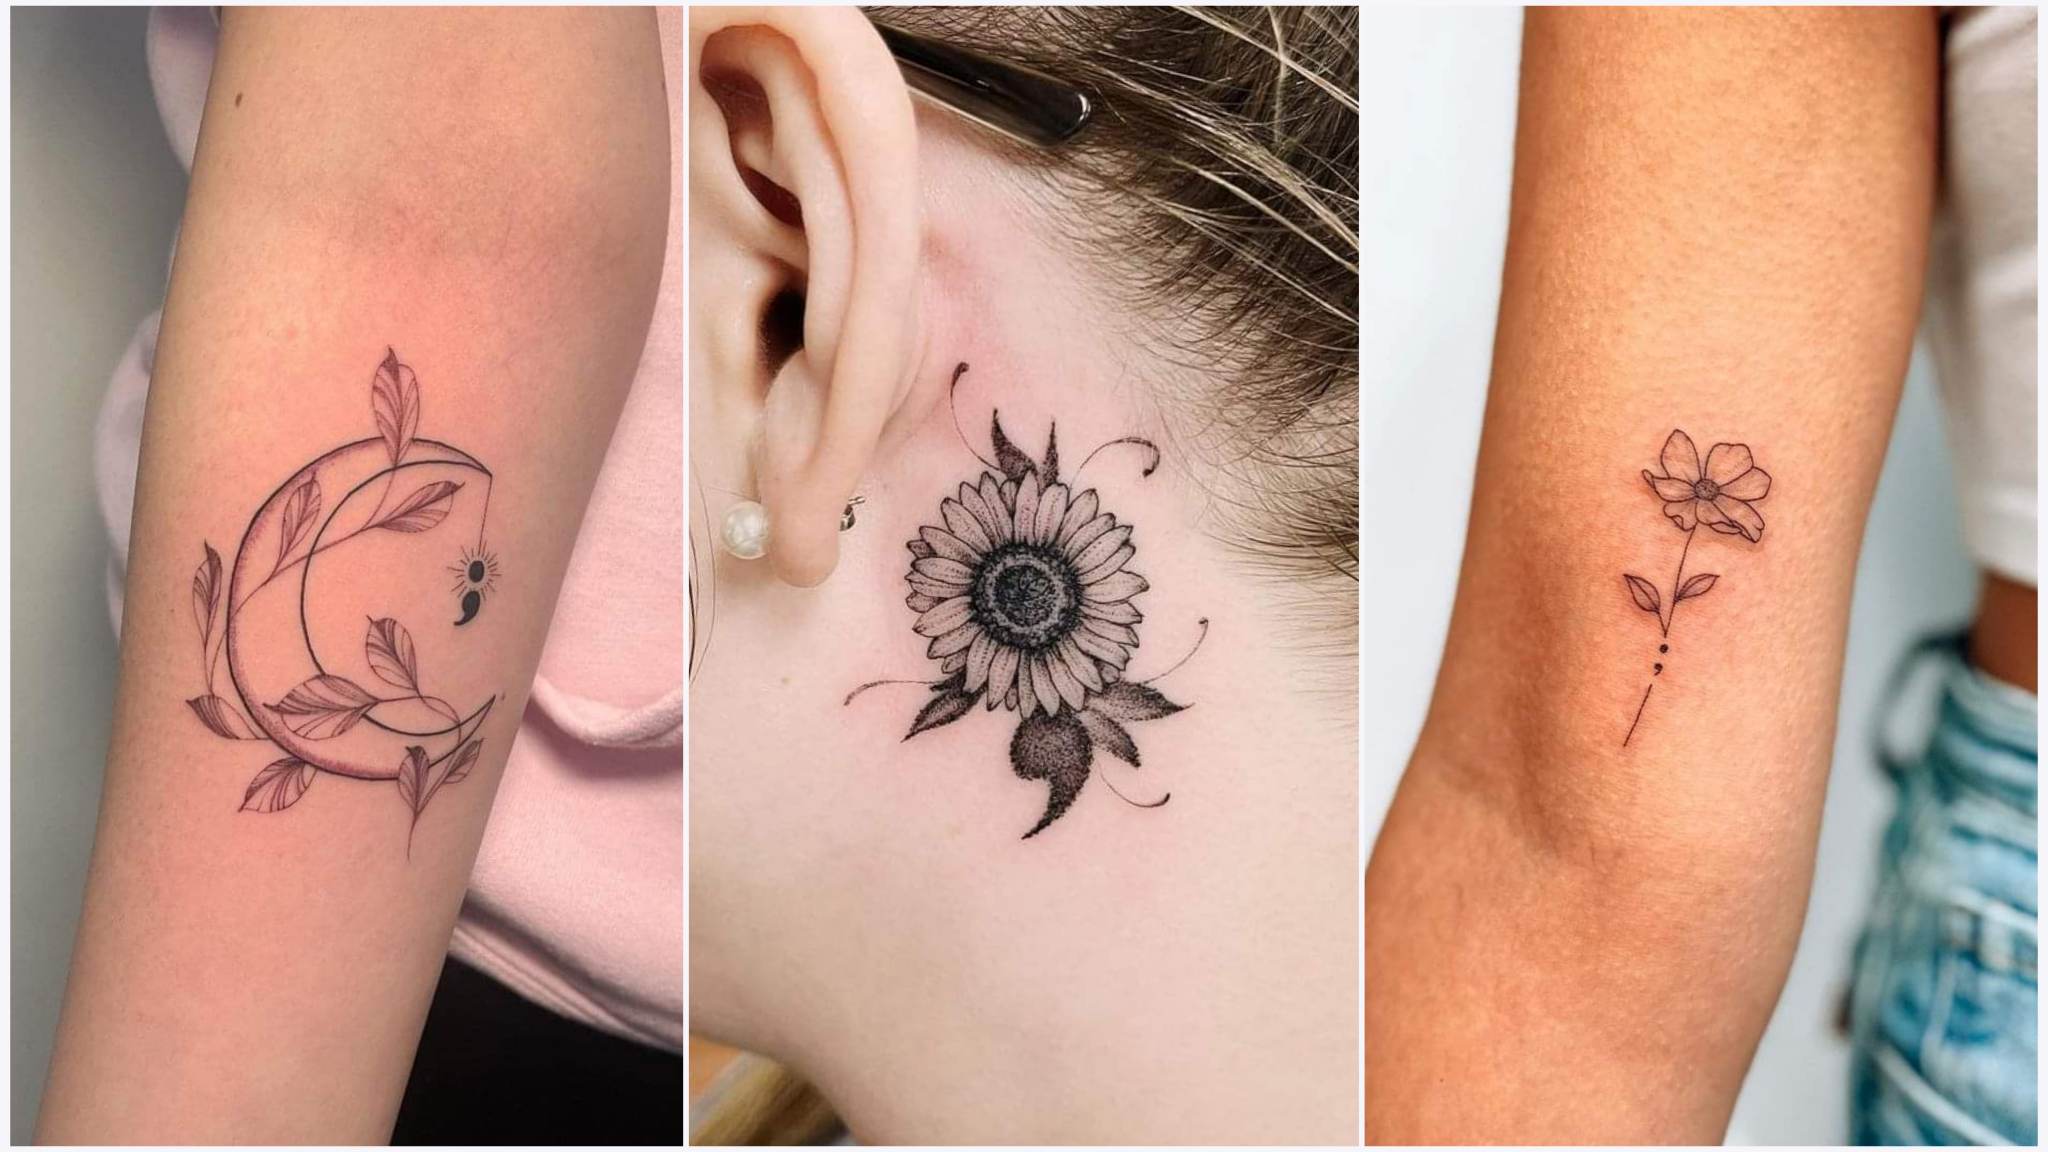 Find out what the semicolon tattoo stands for and why « Euro Weekly News